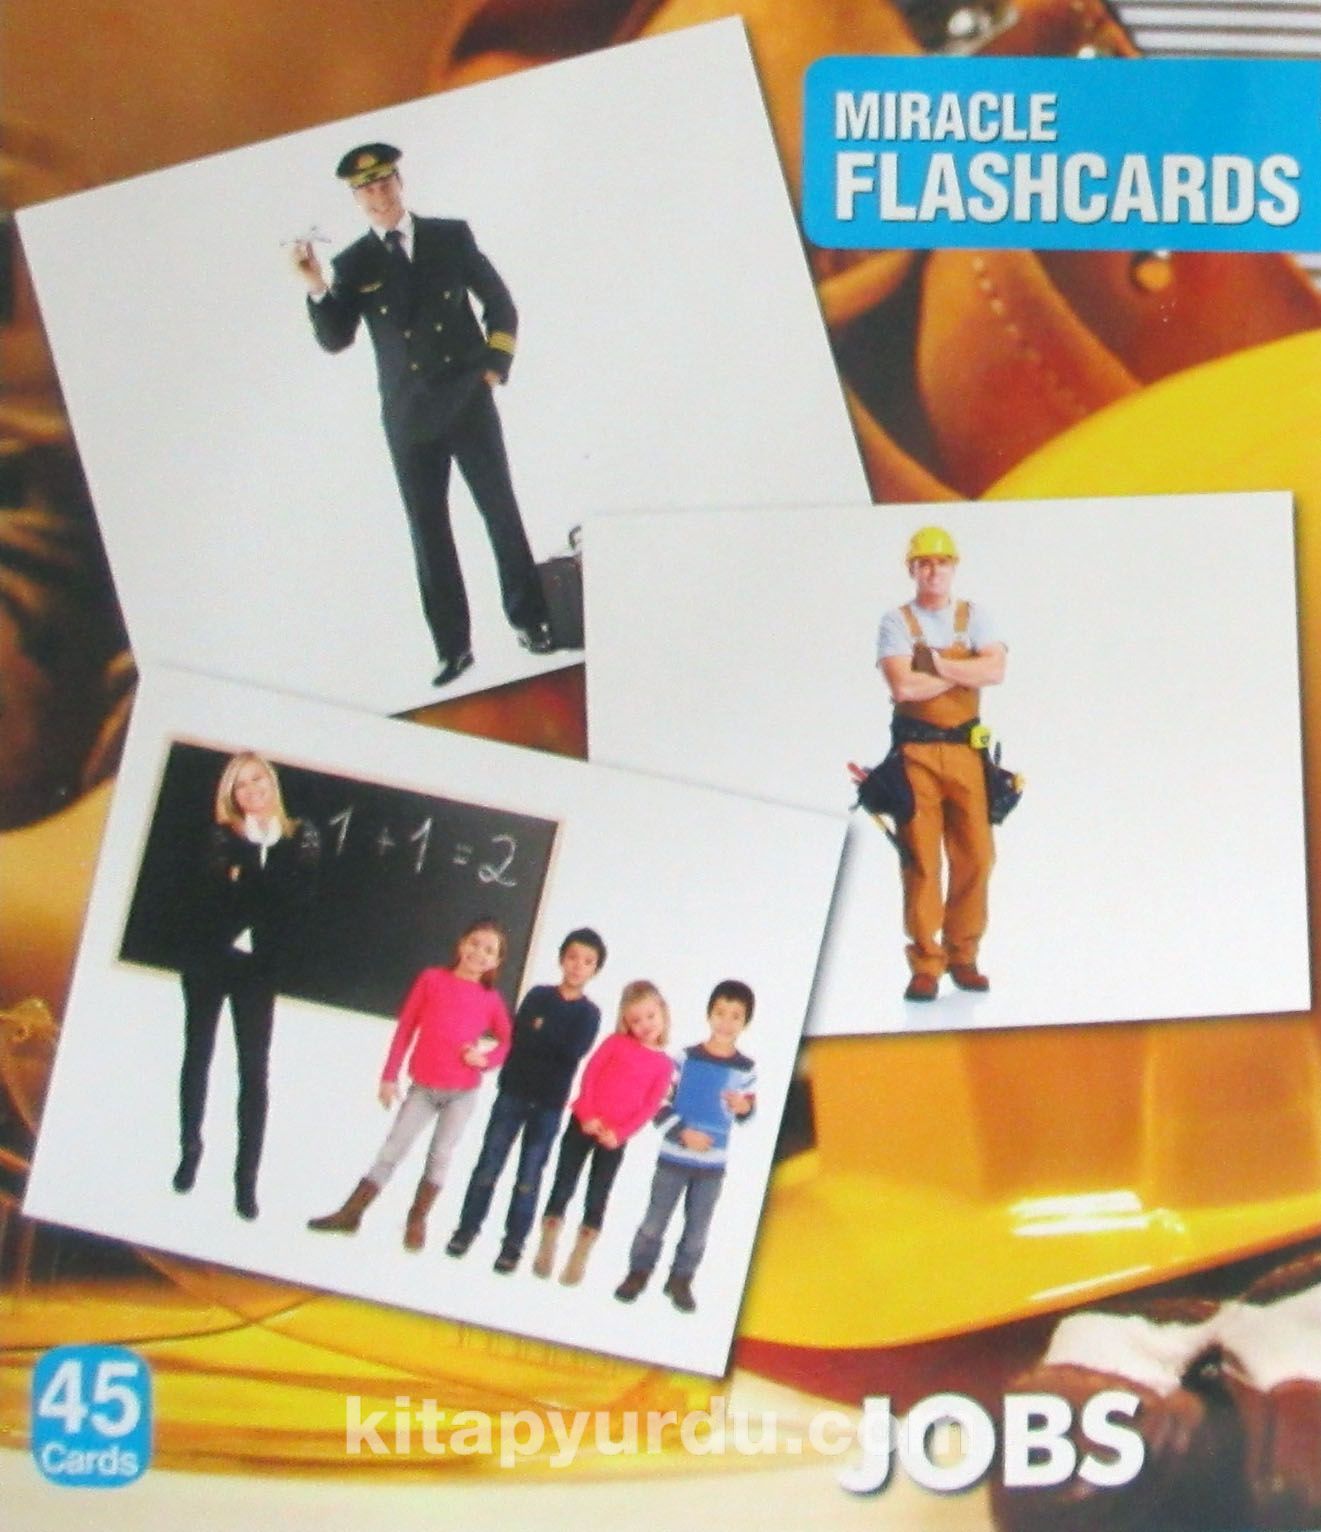 Miracle Flashcards Charts Jobs (45 Cards)